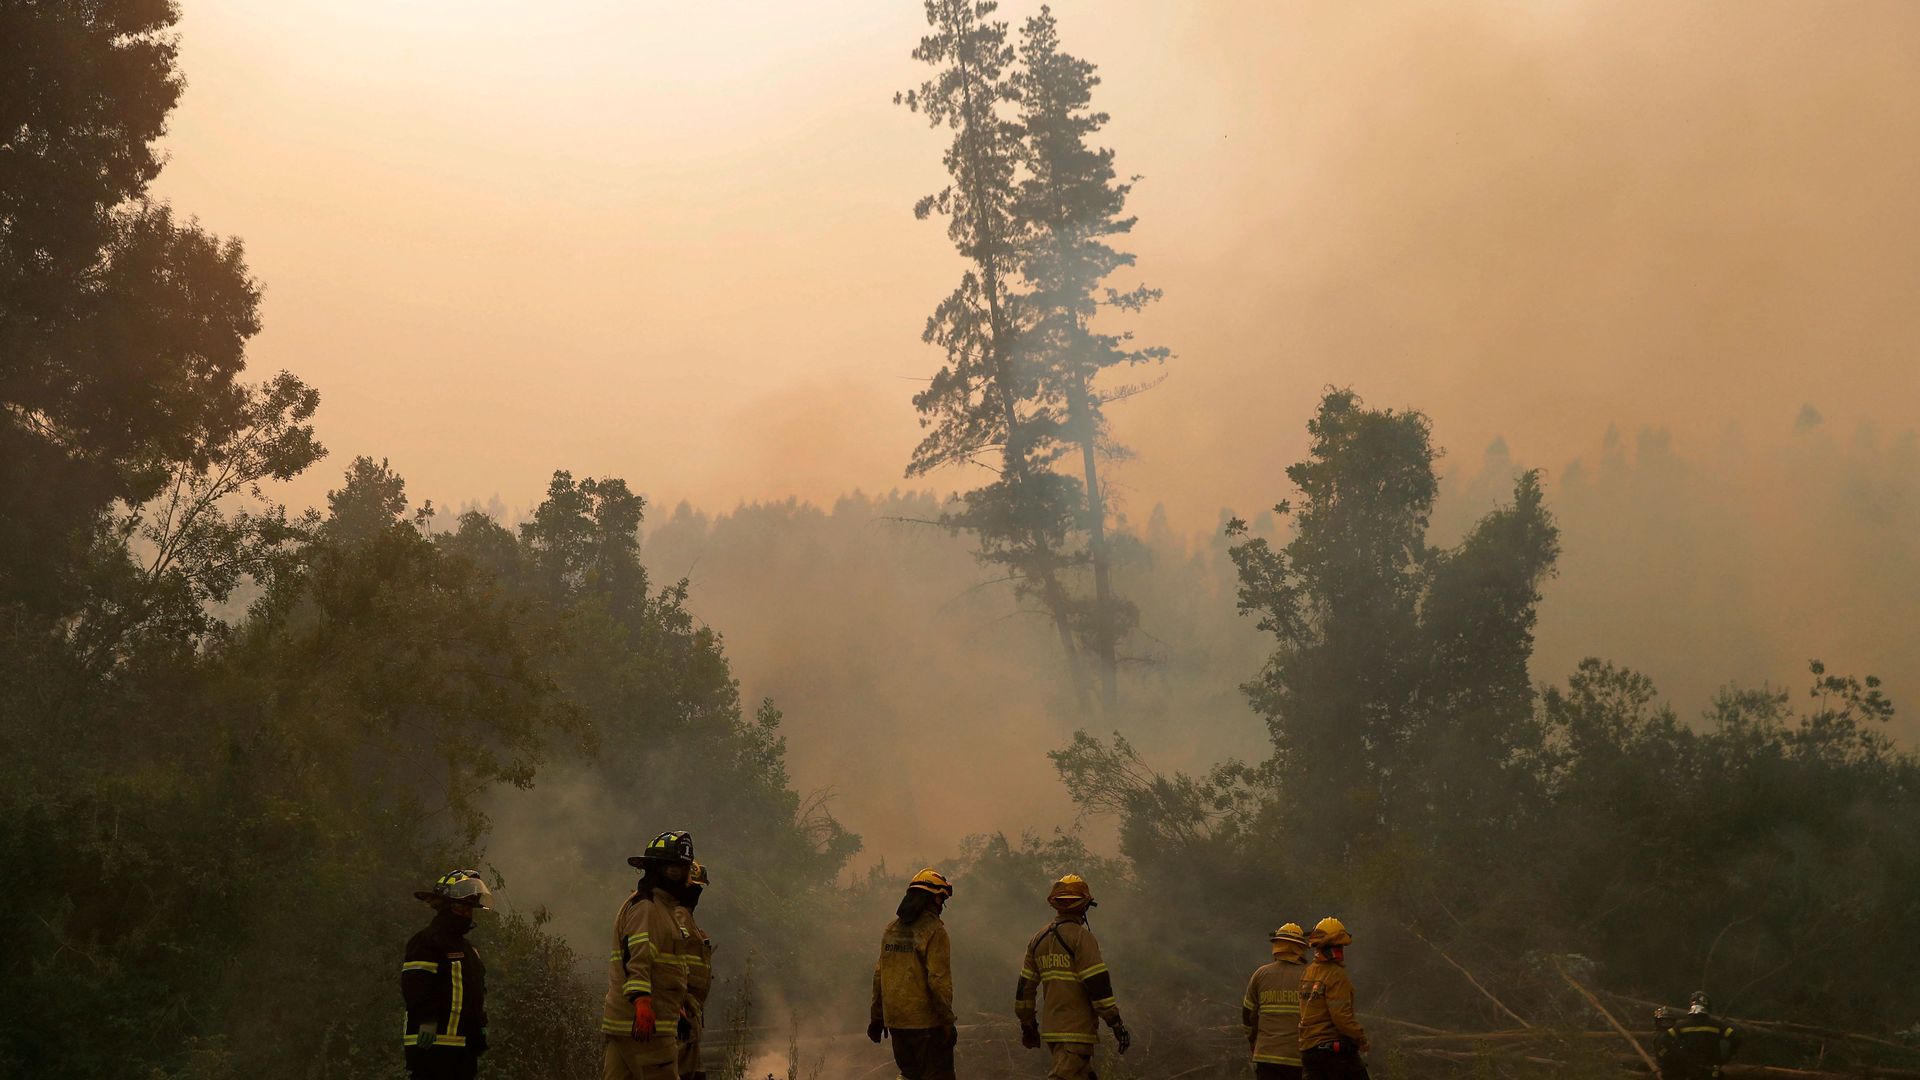 Seven firefighters are seen walking through a forest that has thick, brown smoke, in Chile 